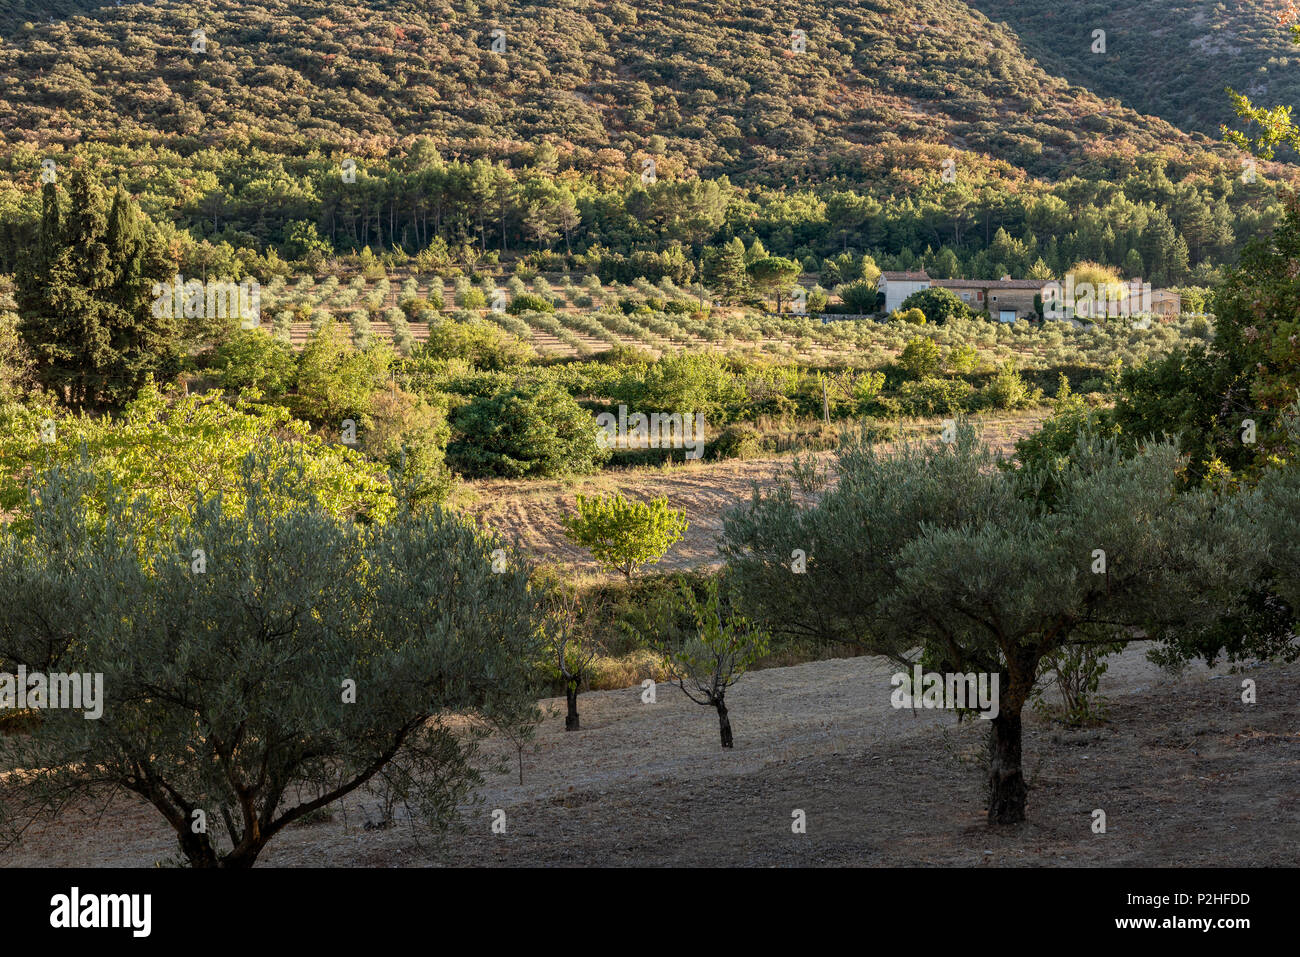 Olive trees and farmland in Luberon, Provence Stock Photo